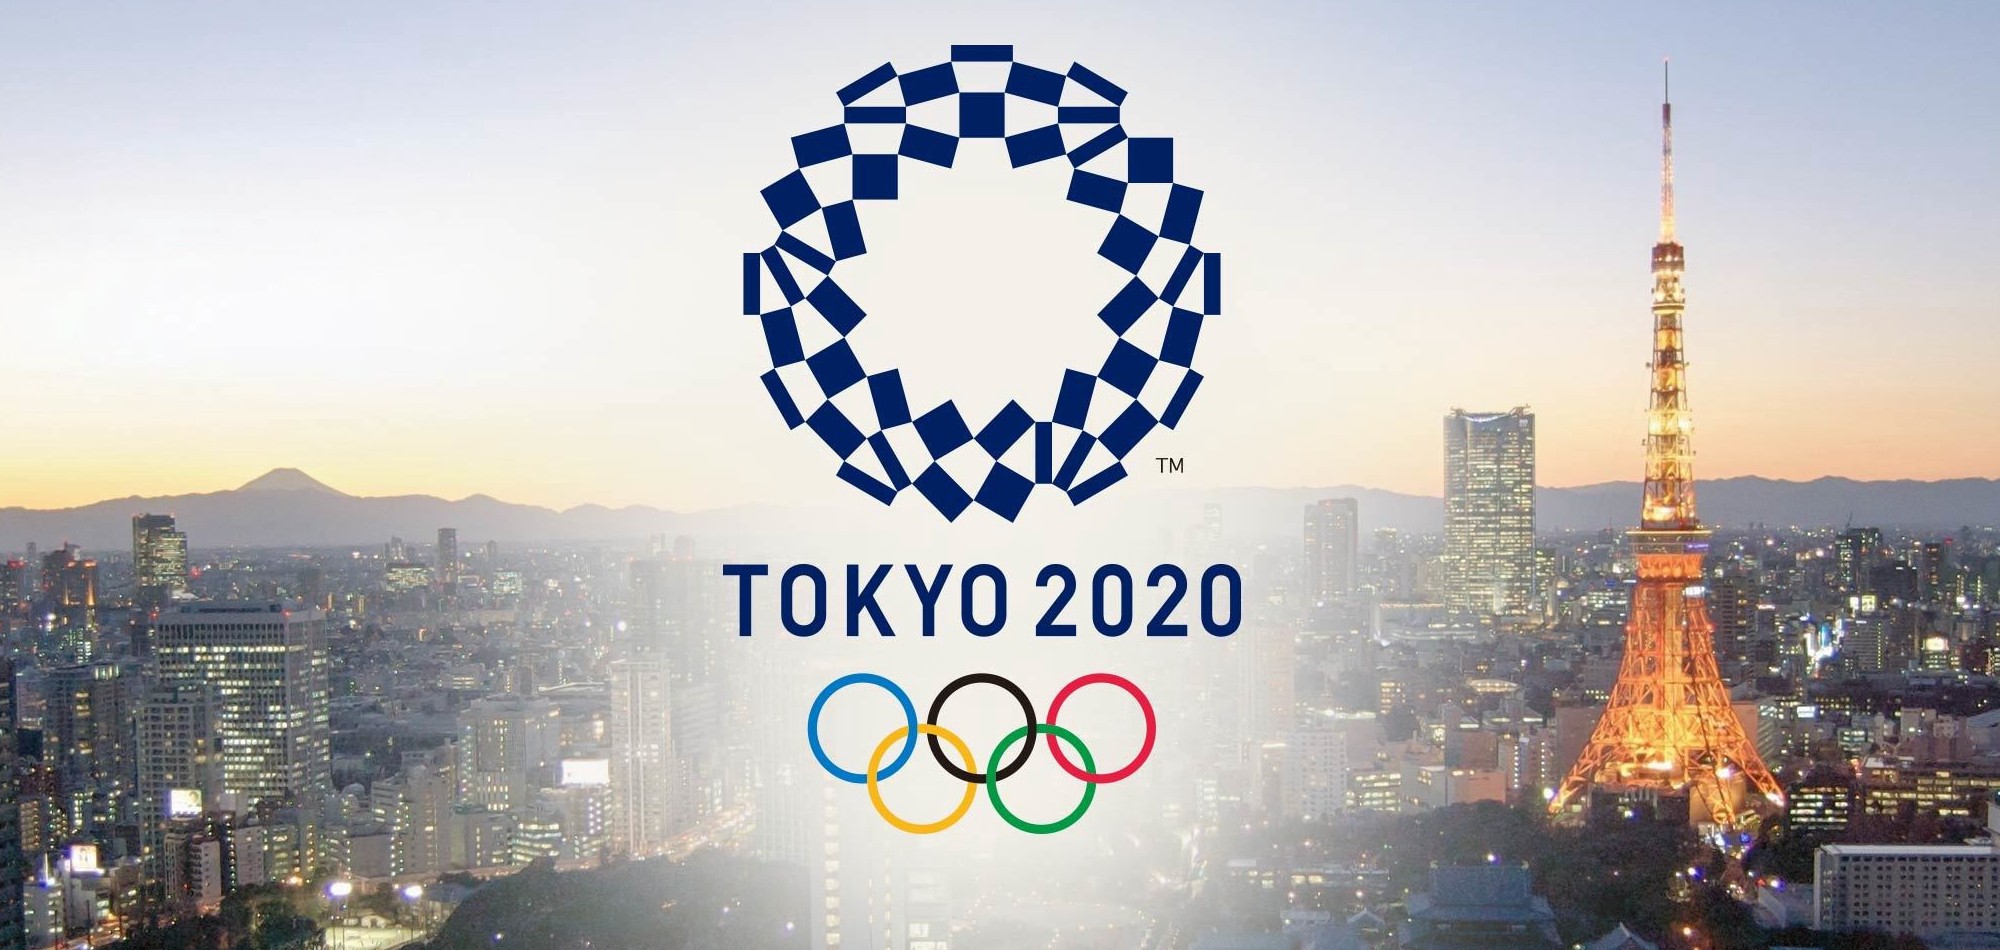 Survey finds 77% of Japanese think Olympics 